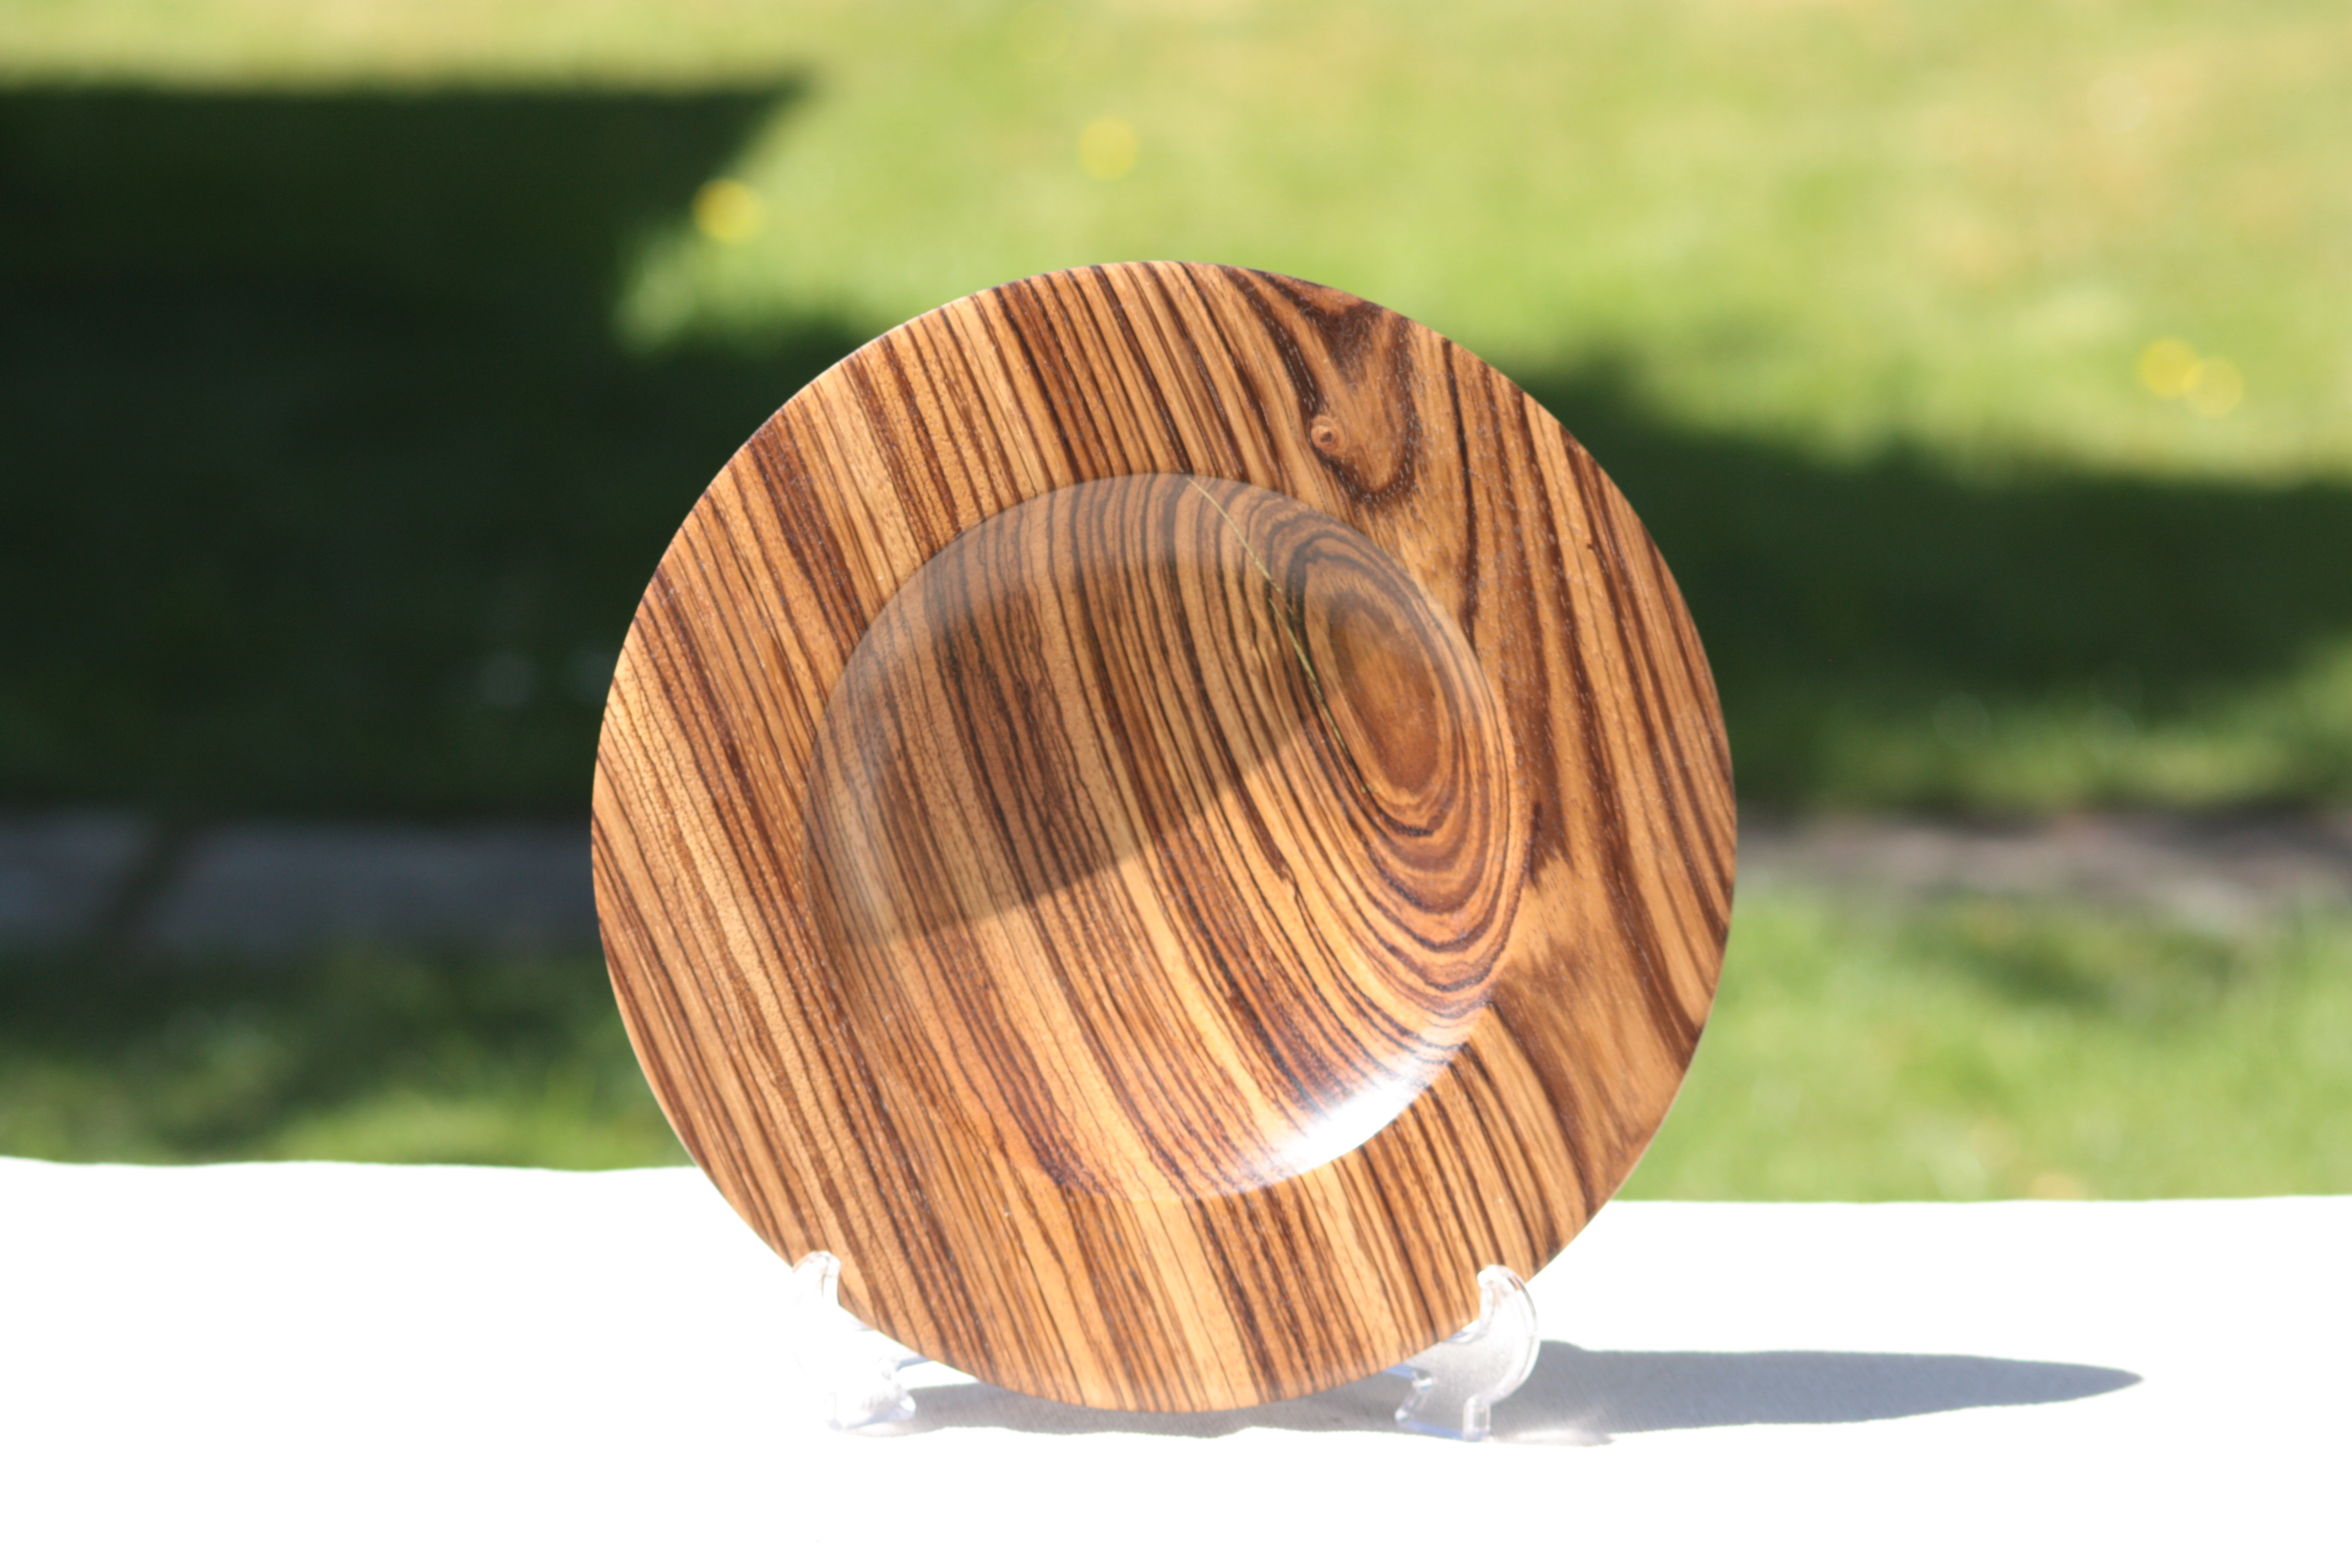 25cm wide shallow dish style platter. Wood: Zebrano. Available £30.00